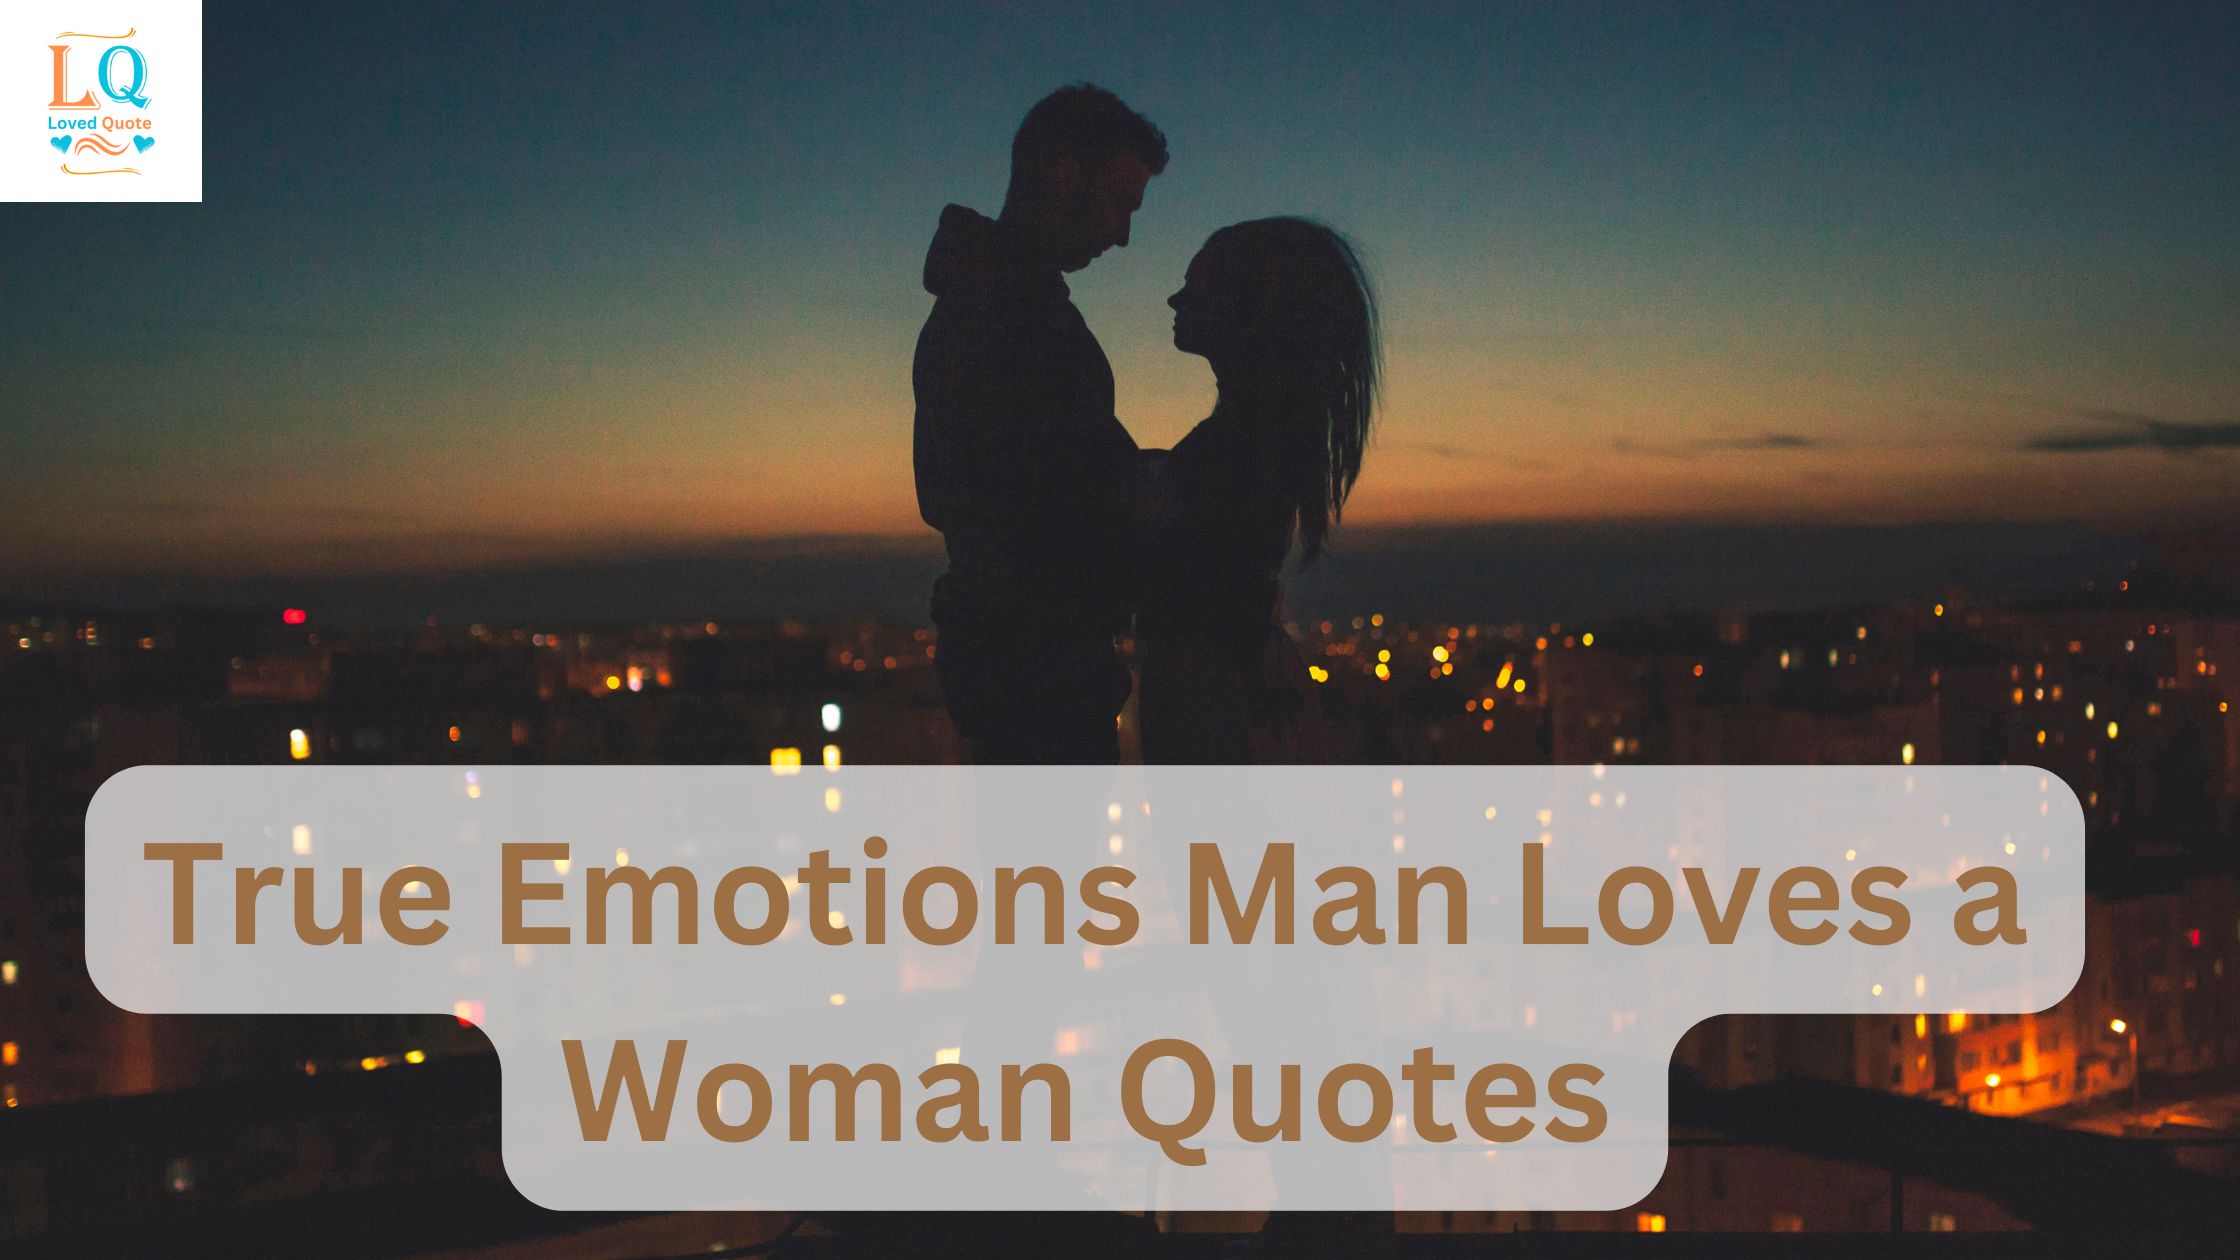 True Emotions Man Loves a Woman Quotes